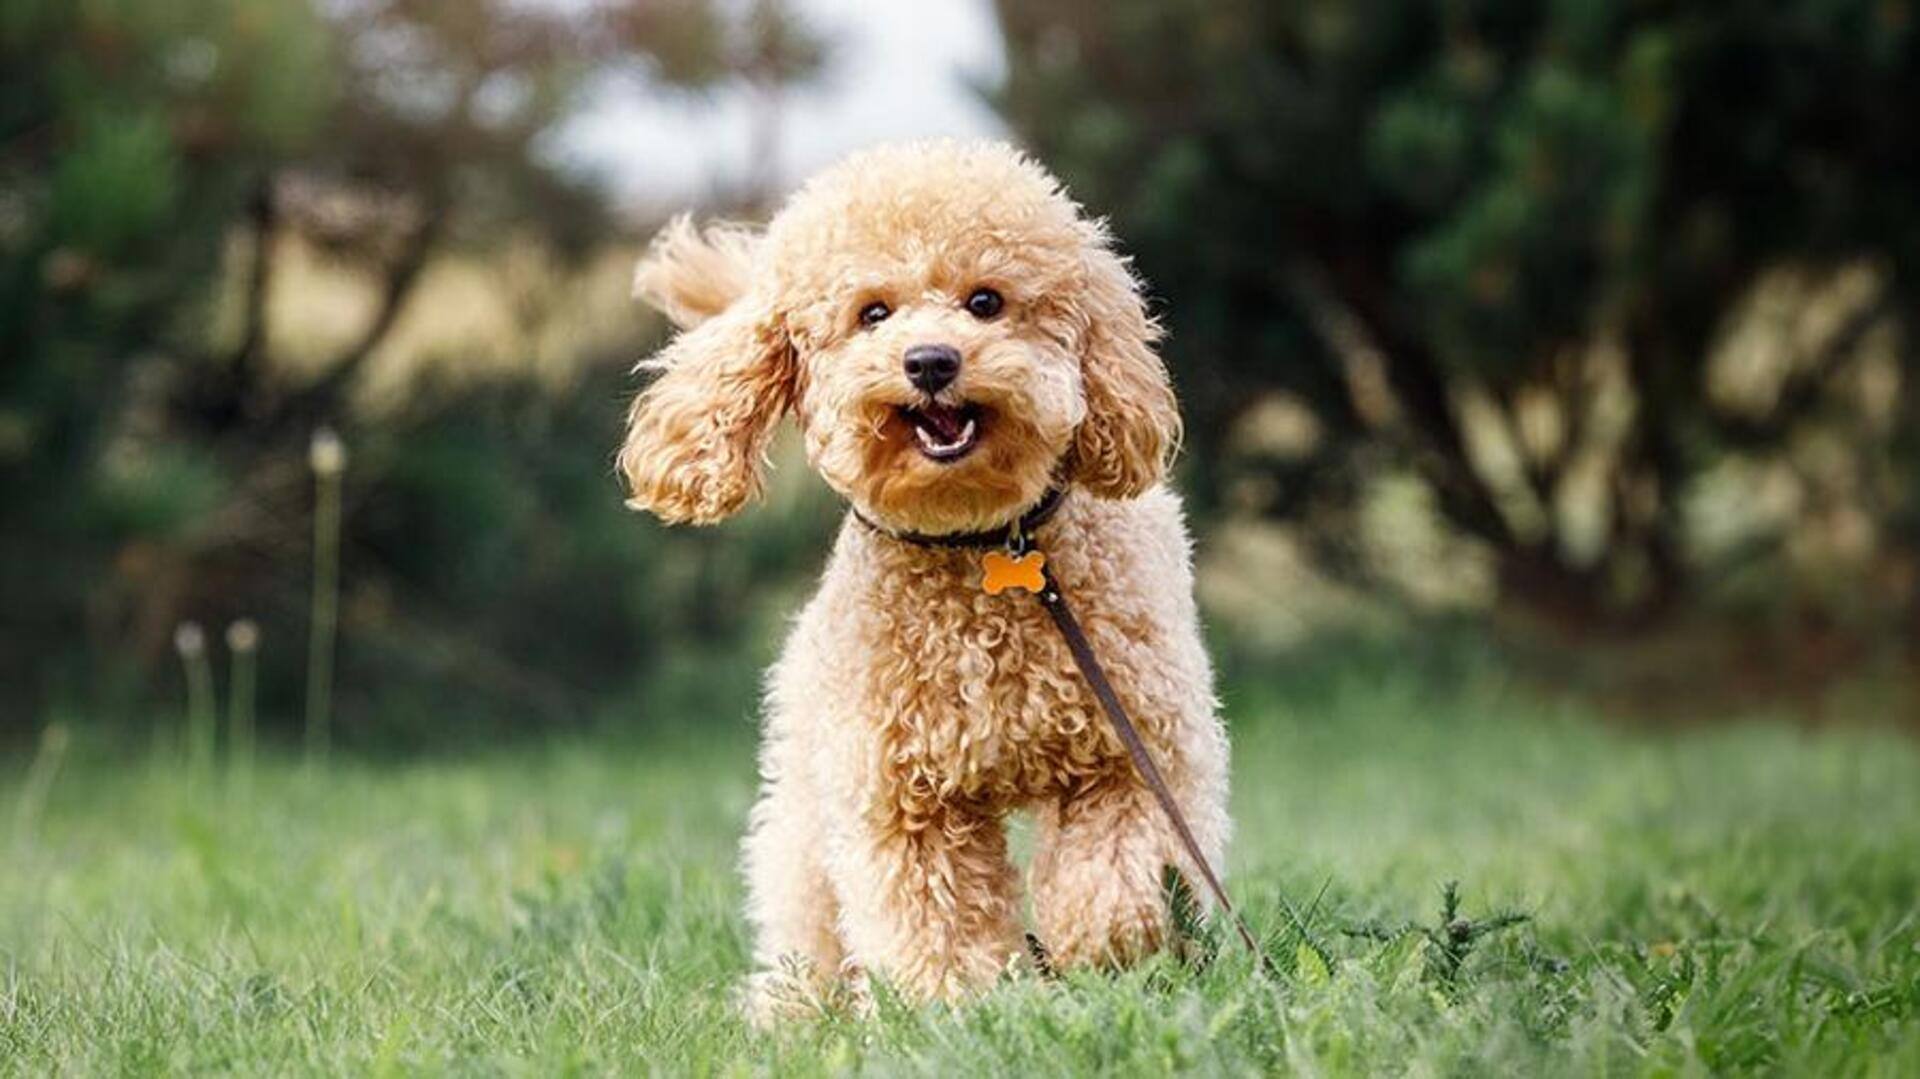 Poodle dog: A nutrition and training guide for good health